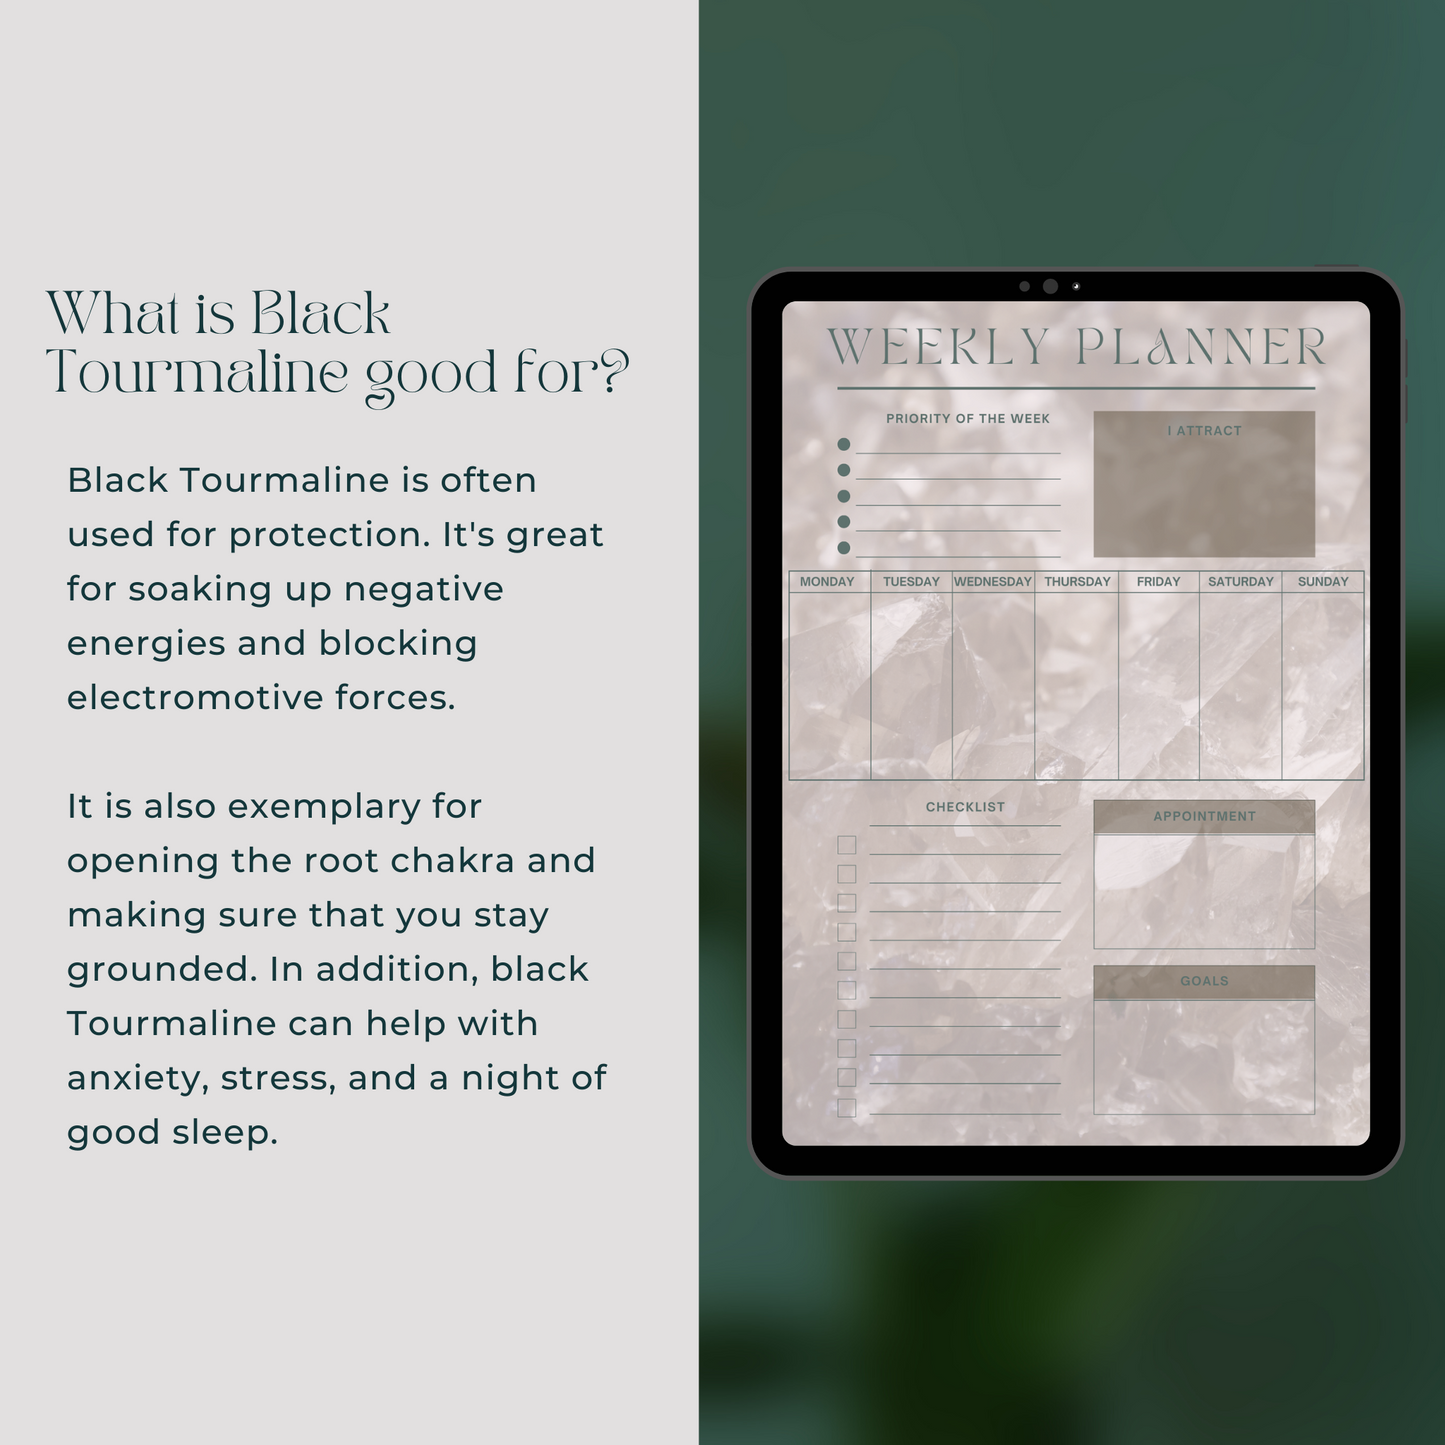 Daily Weekly Monthly Planner Set - Black Tourmaline